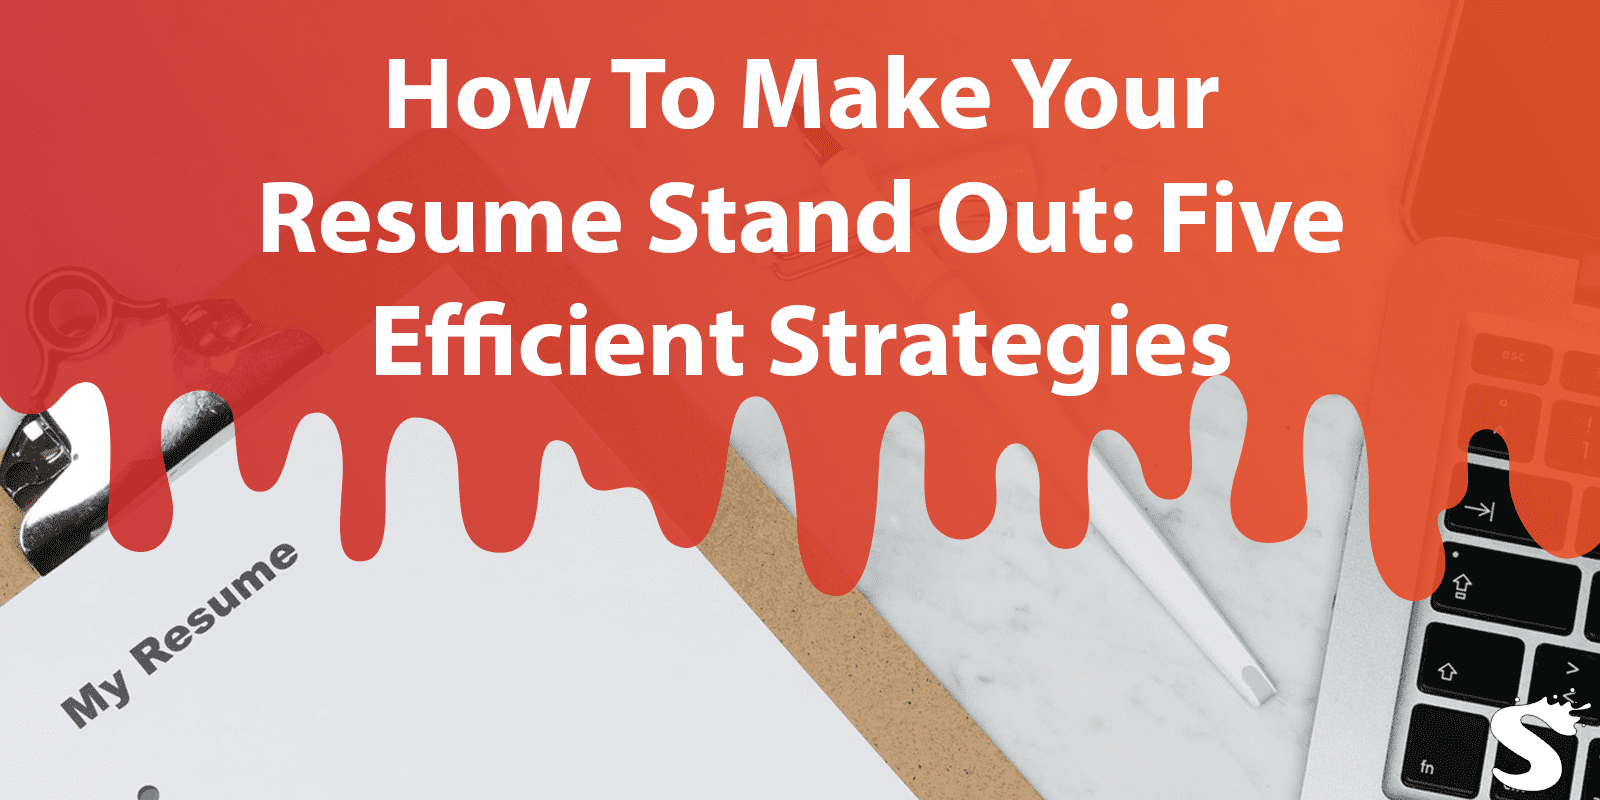 How To Make Your Resume Stand Out: Five Efficient Strategies